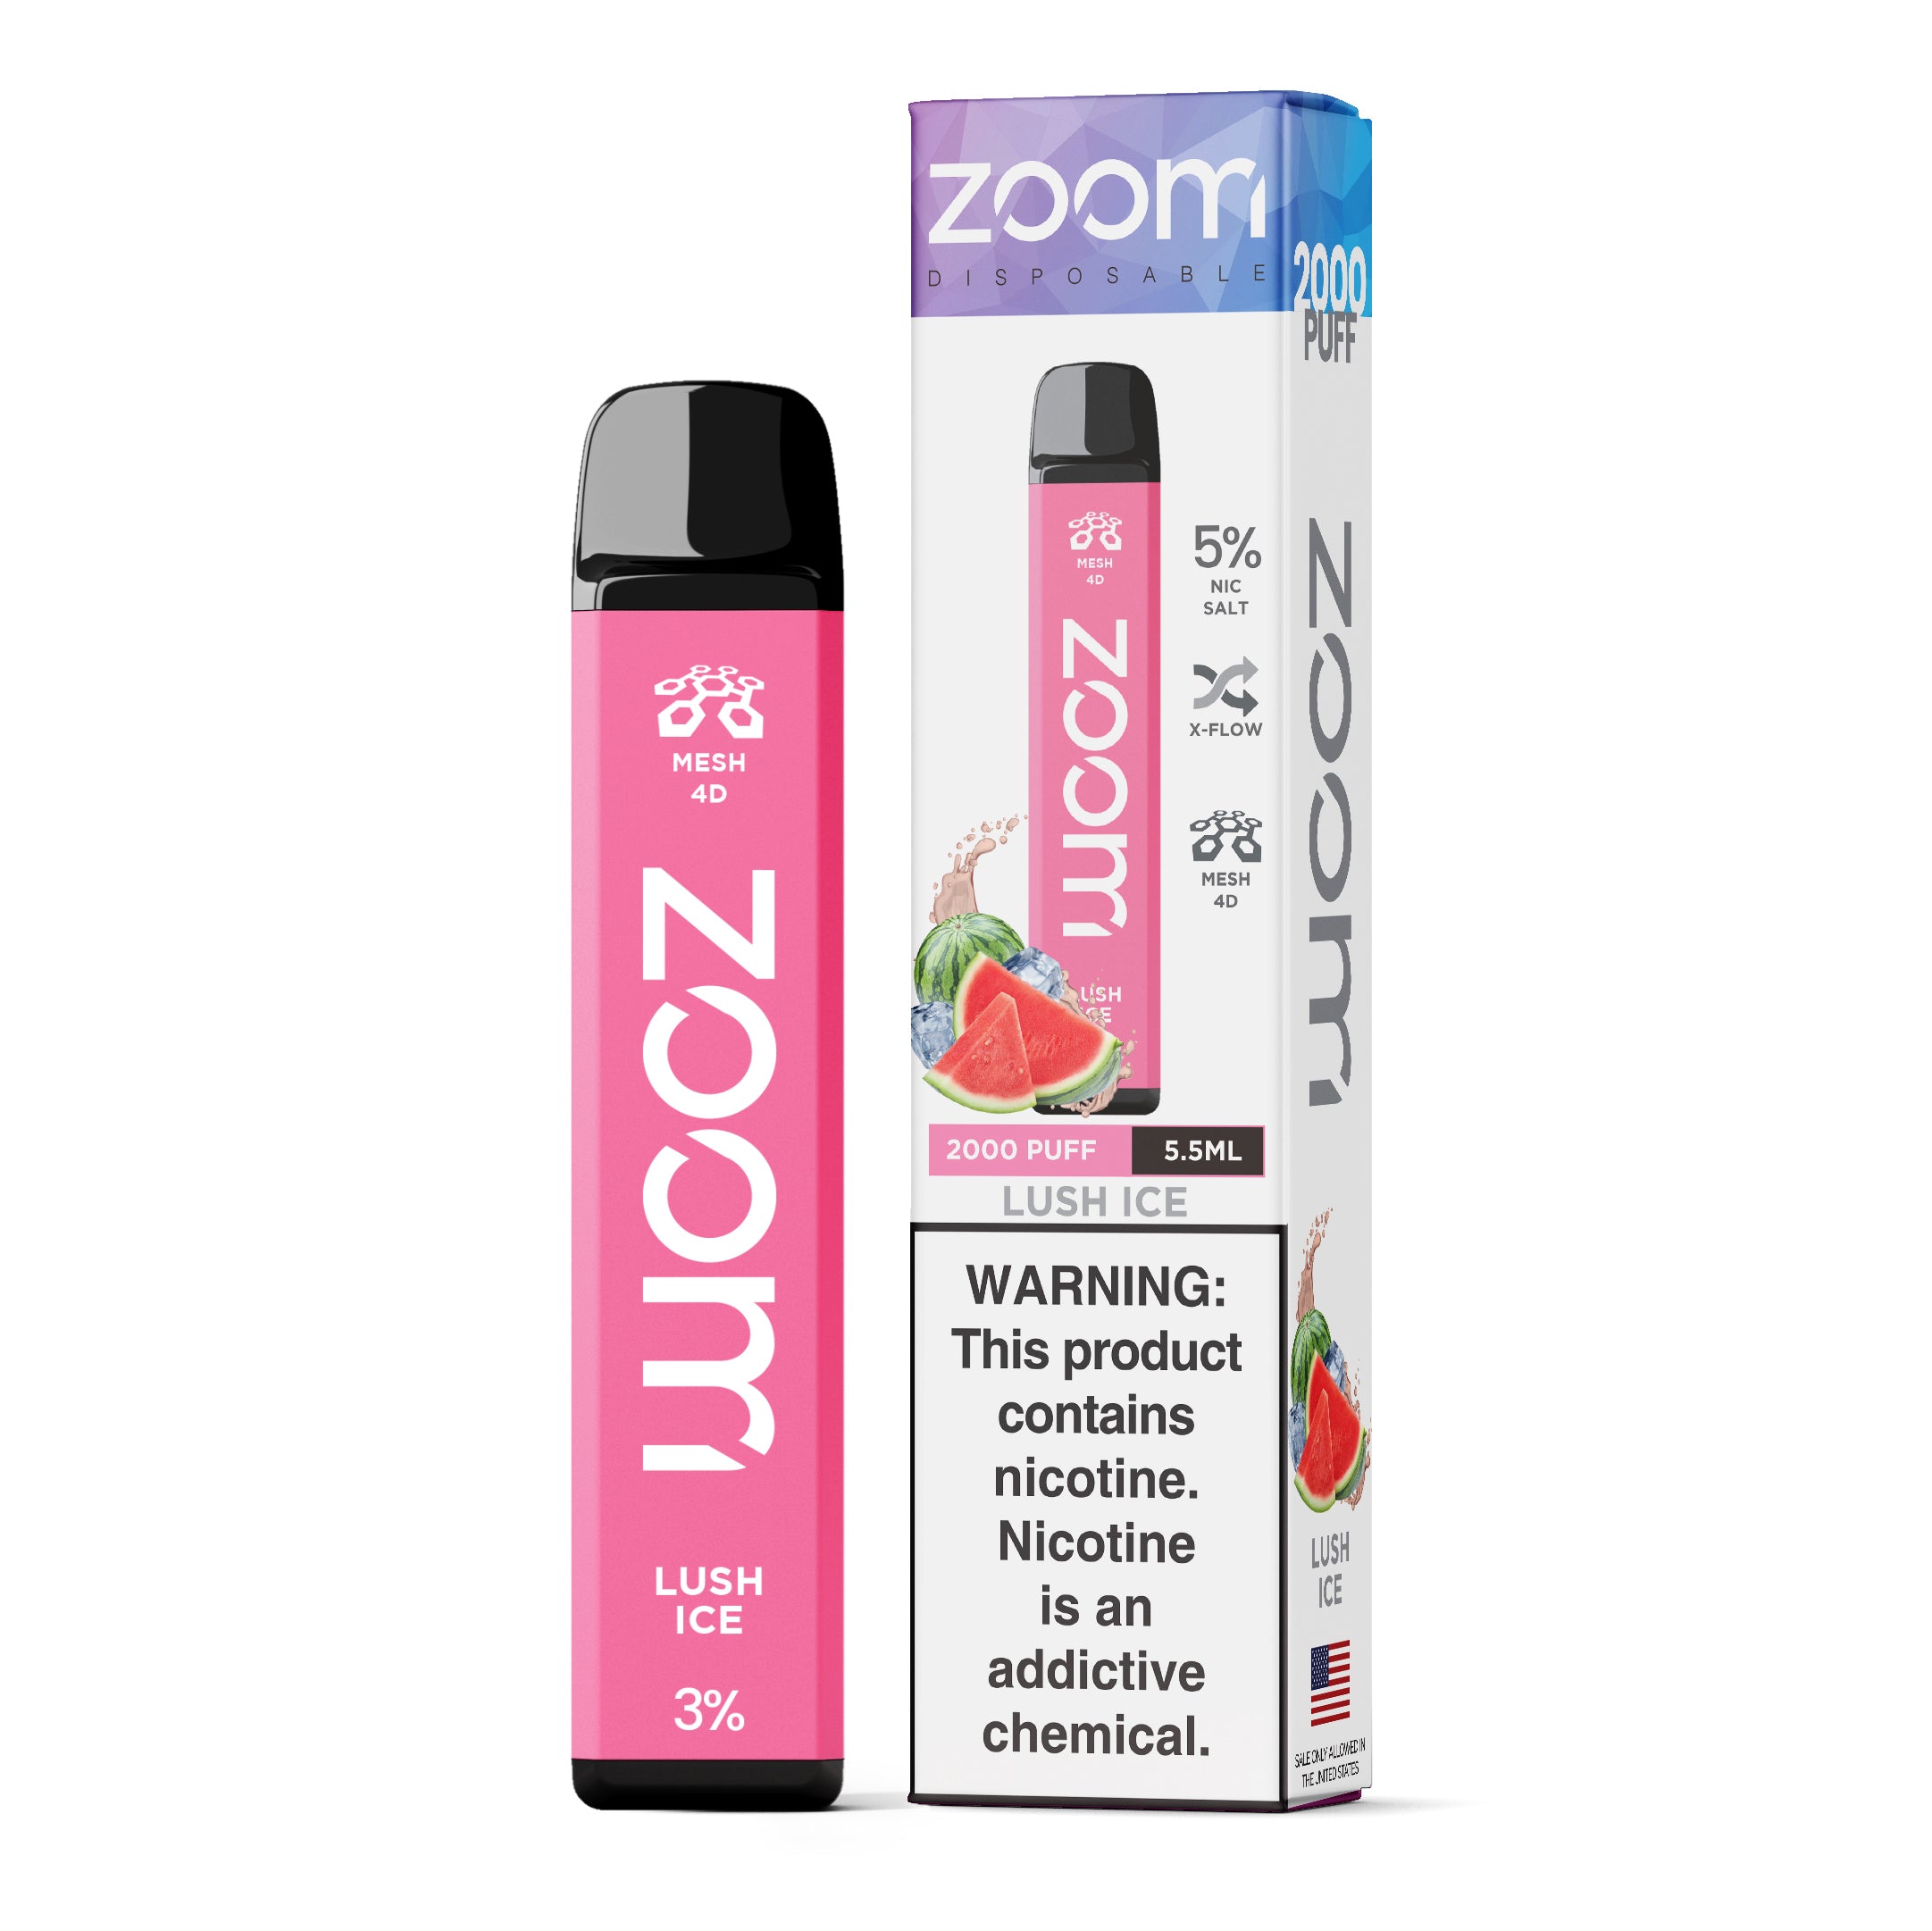 Zoom Disposable | 2000 Puffs | 5.5mL Lush Ice with packaging